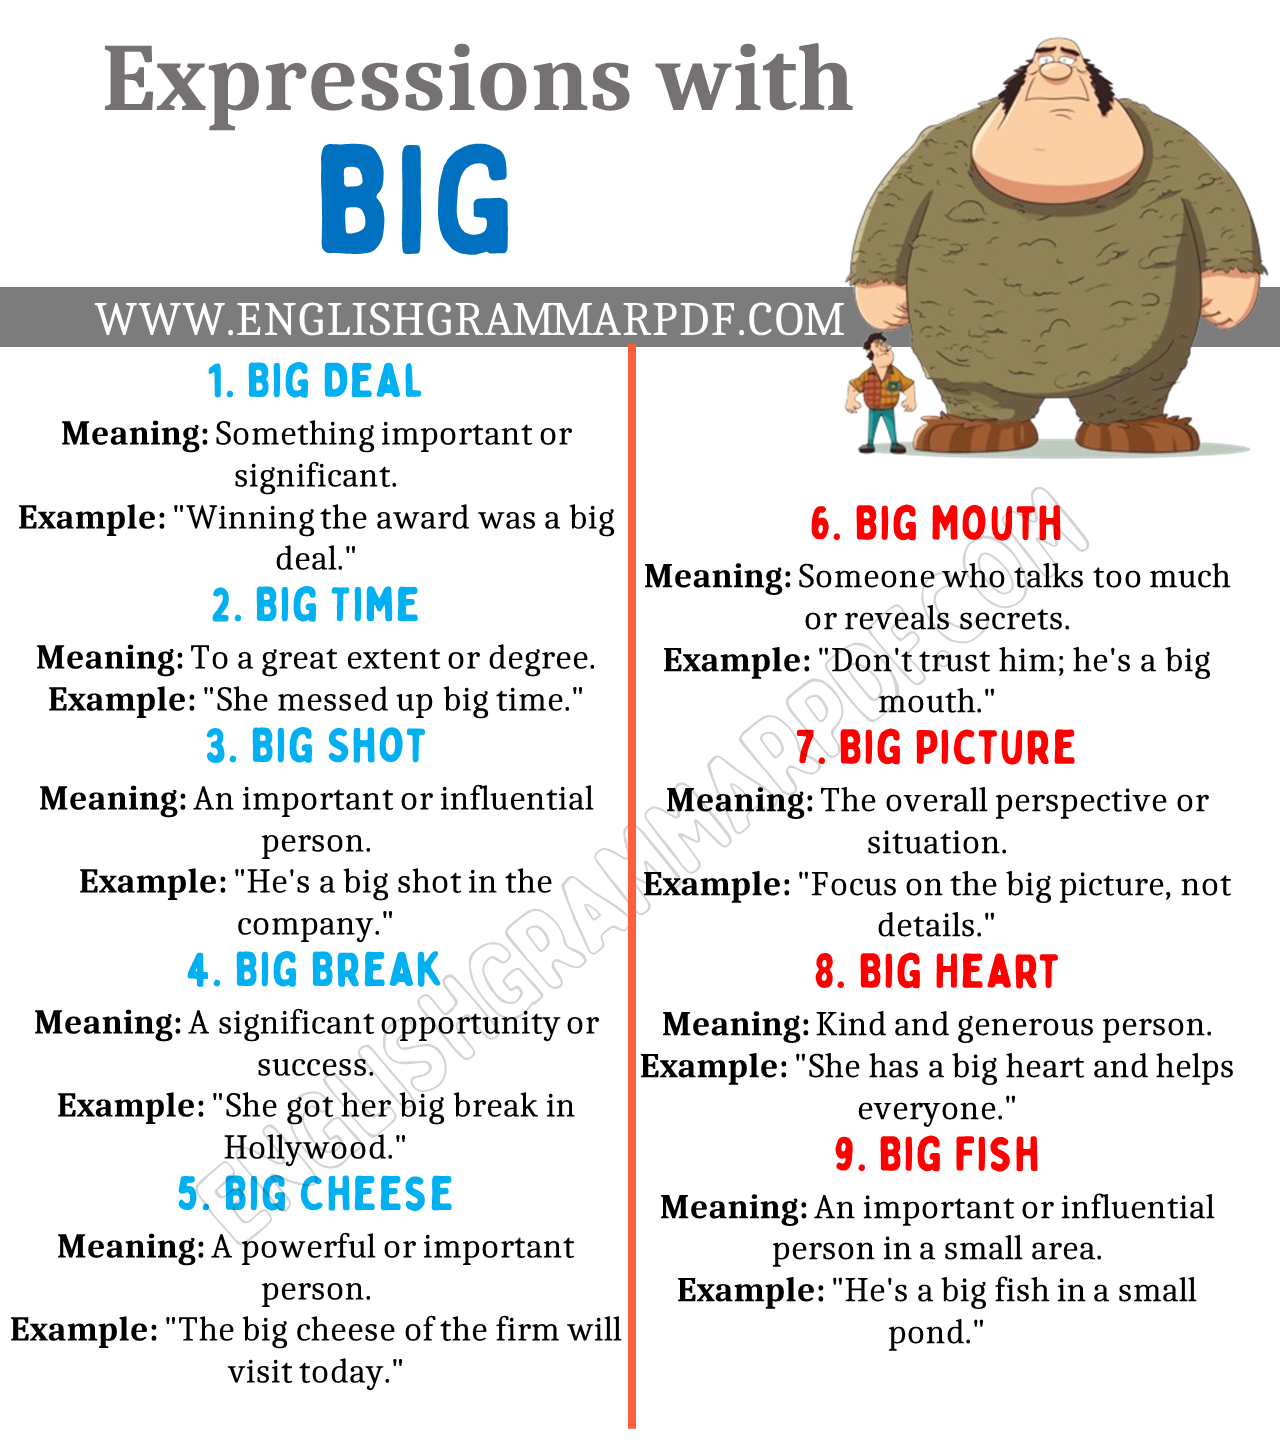 Expressions with the Word “Big”